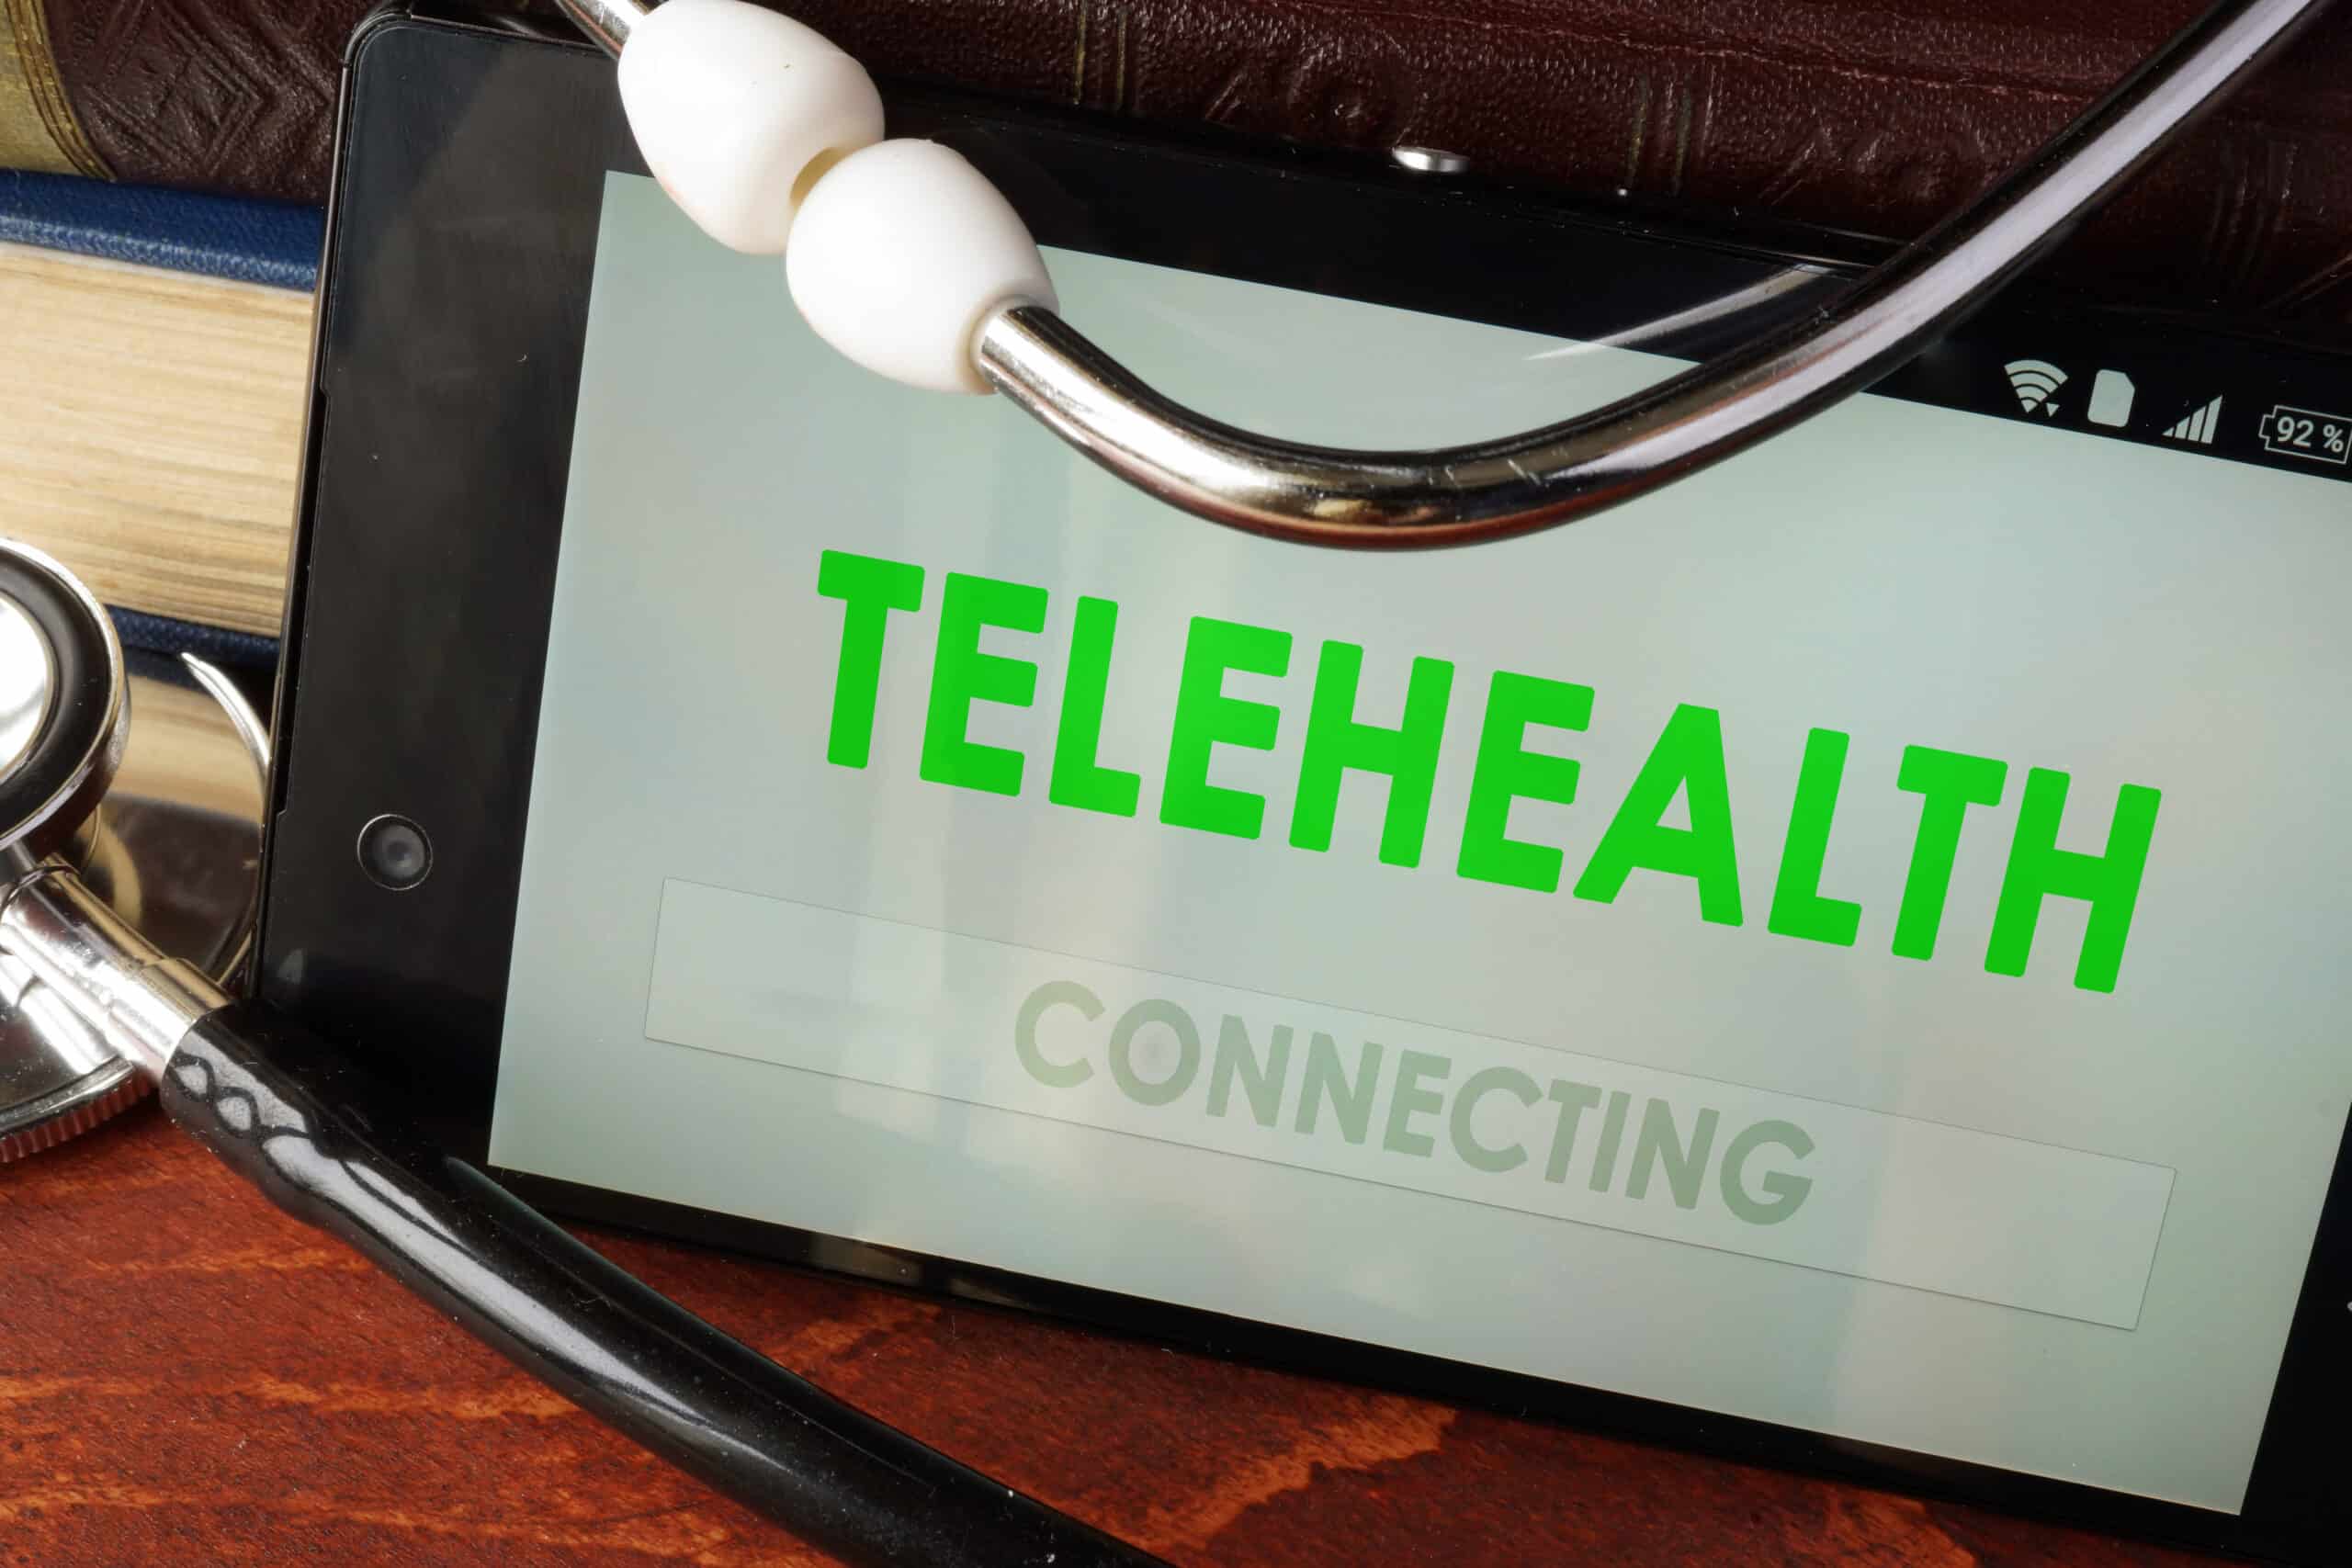 Telecare cuts costs, boosts quality of life for dementia patients